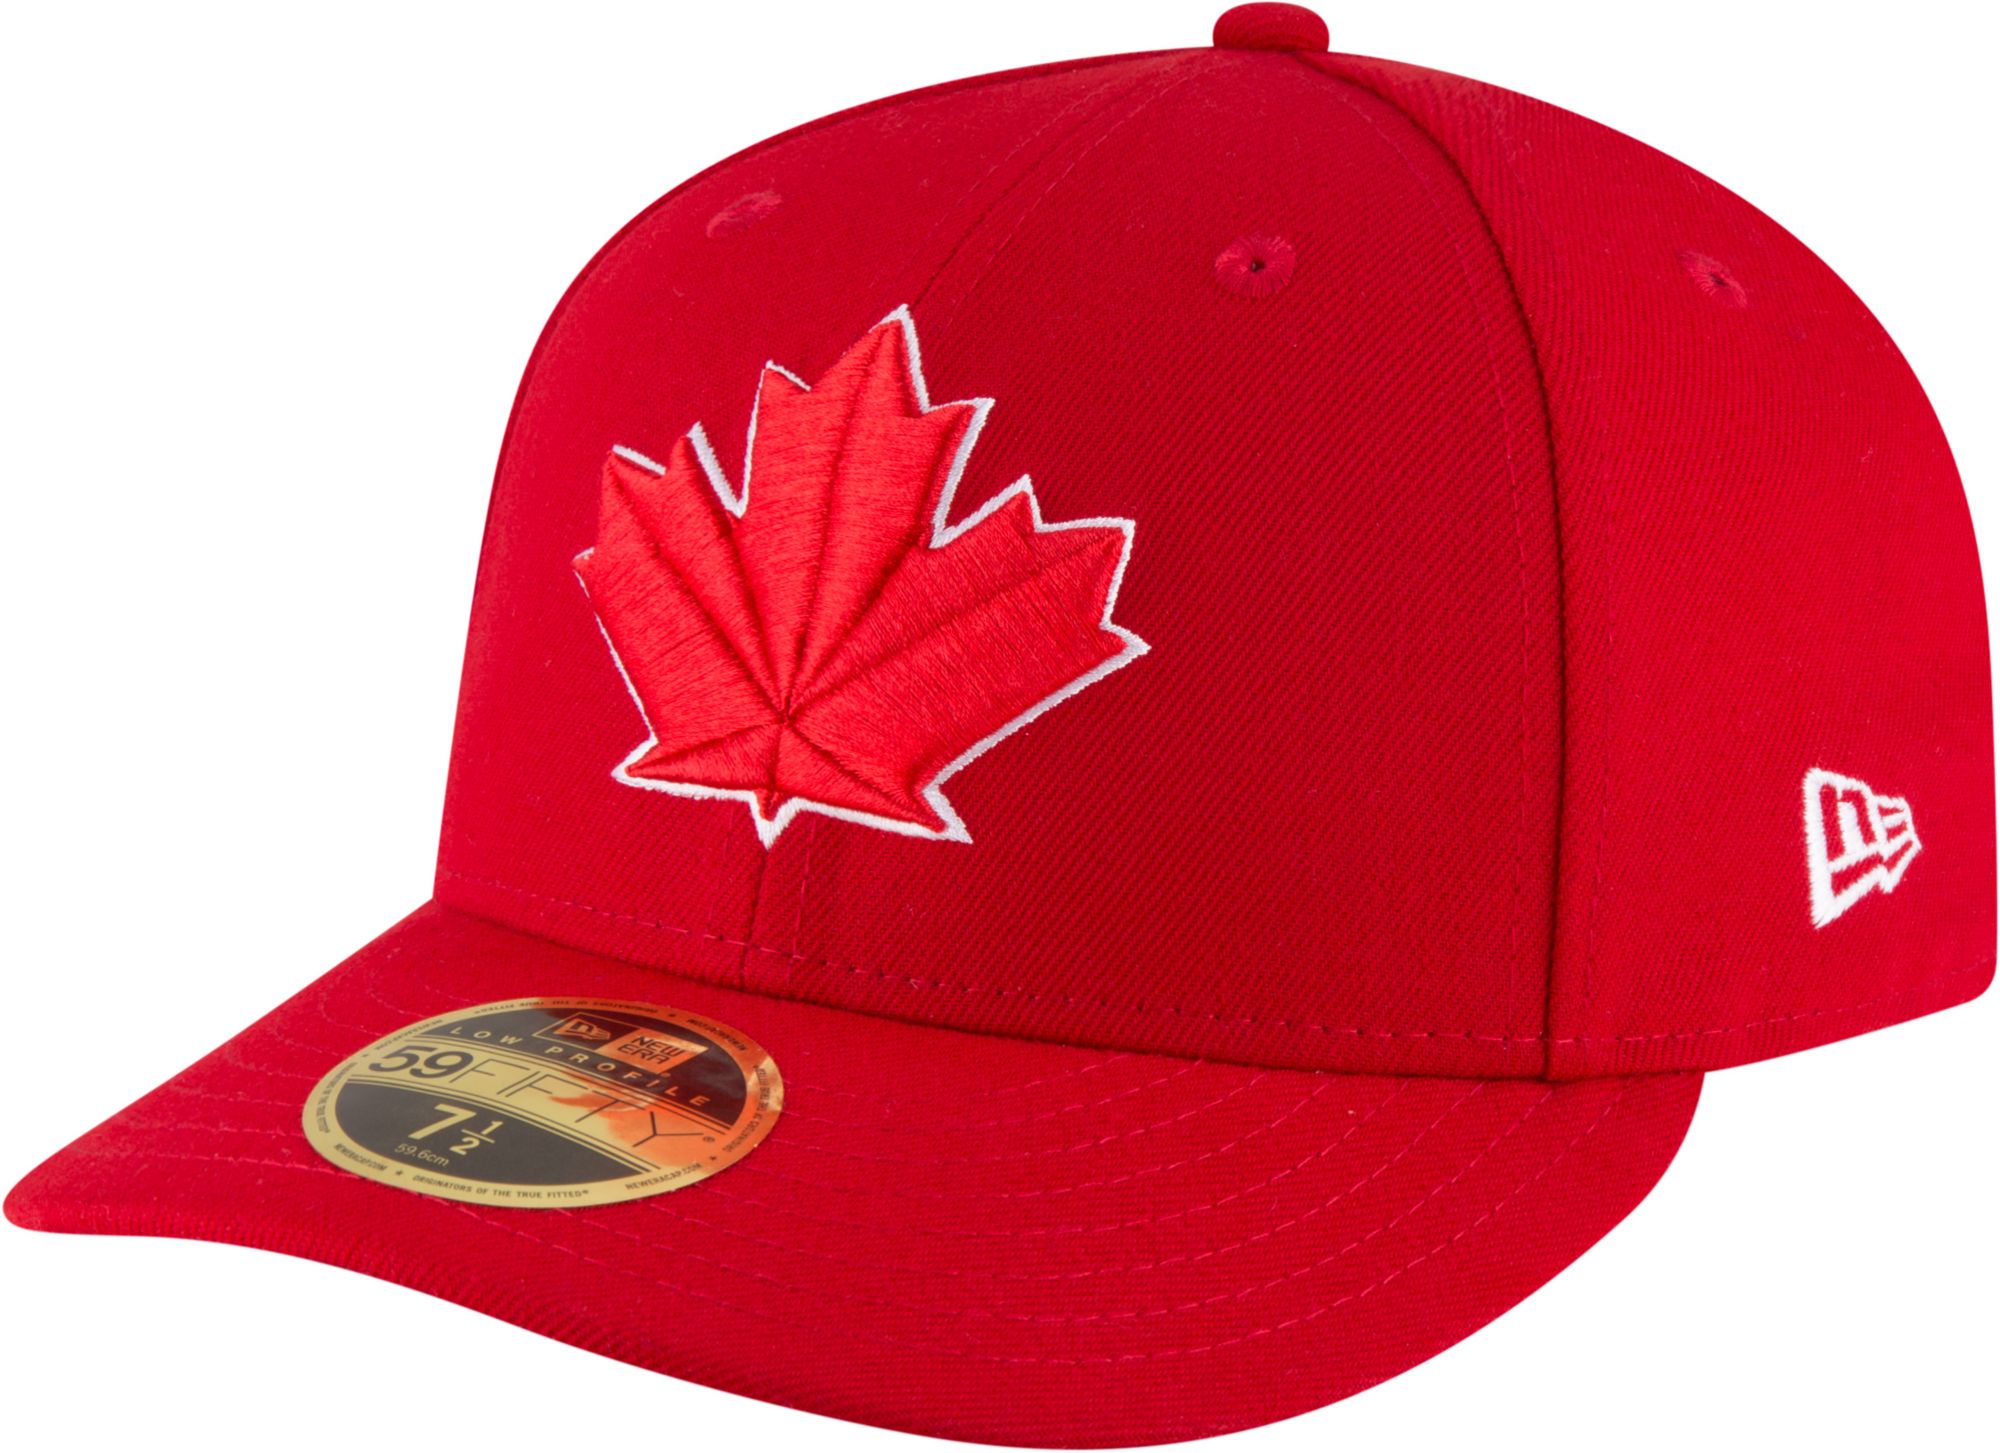 Black Blue Jays Hat With Red Maple Leaf Off 51